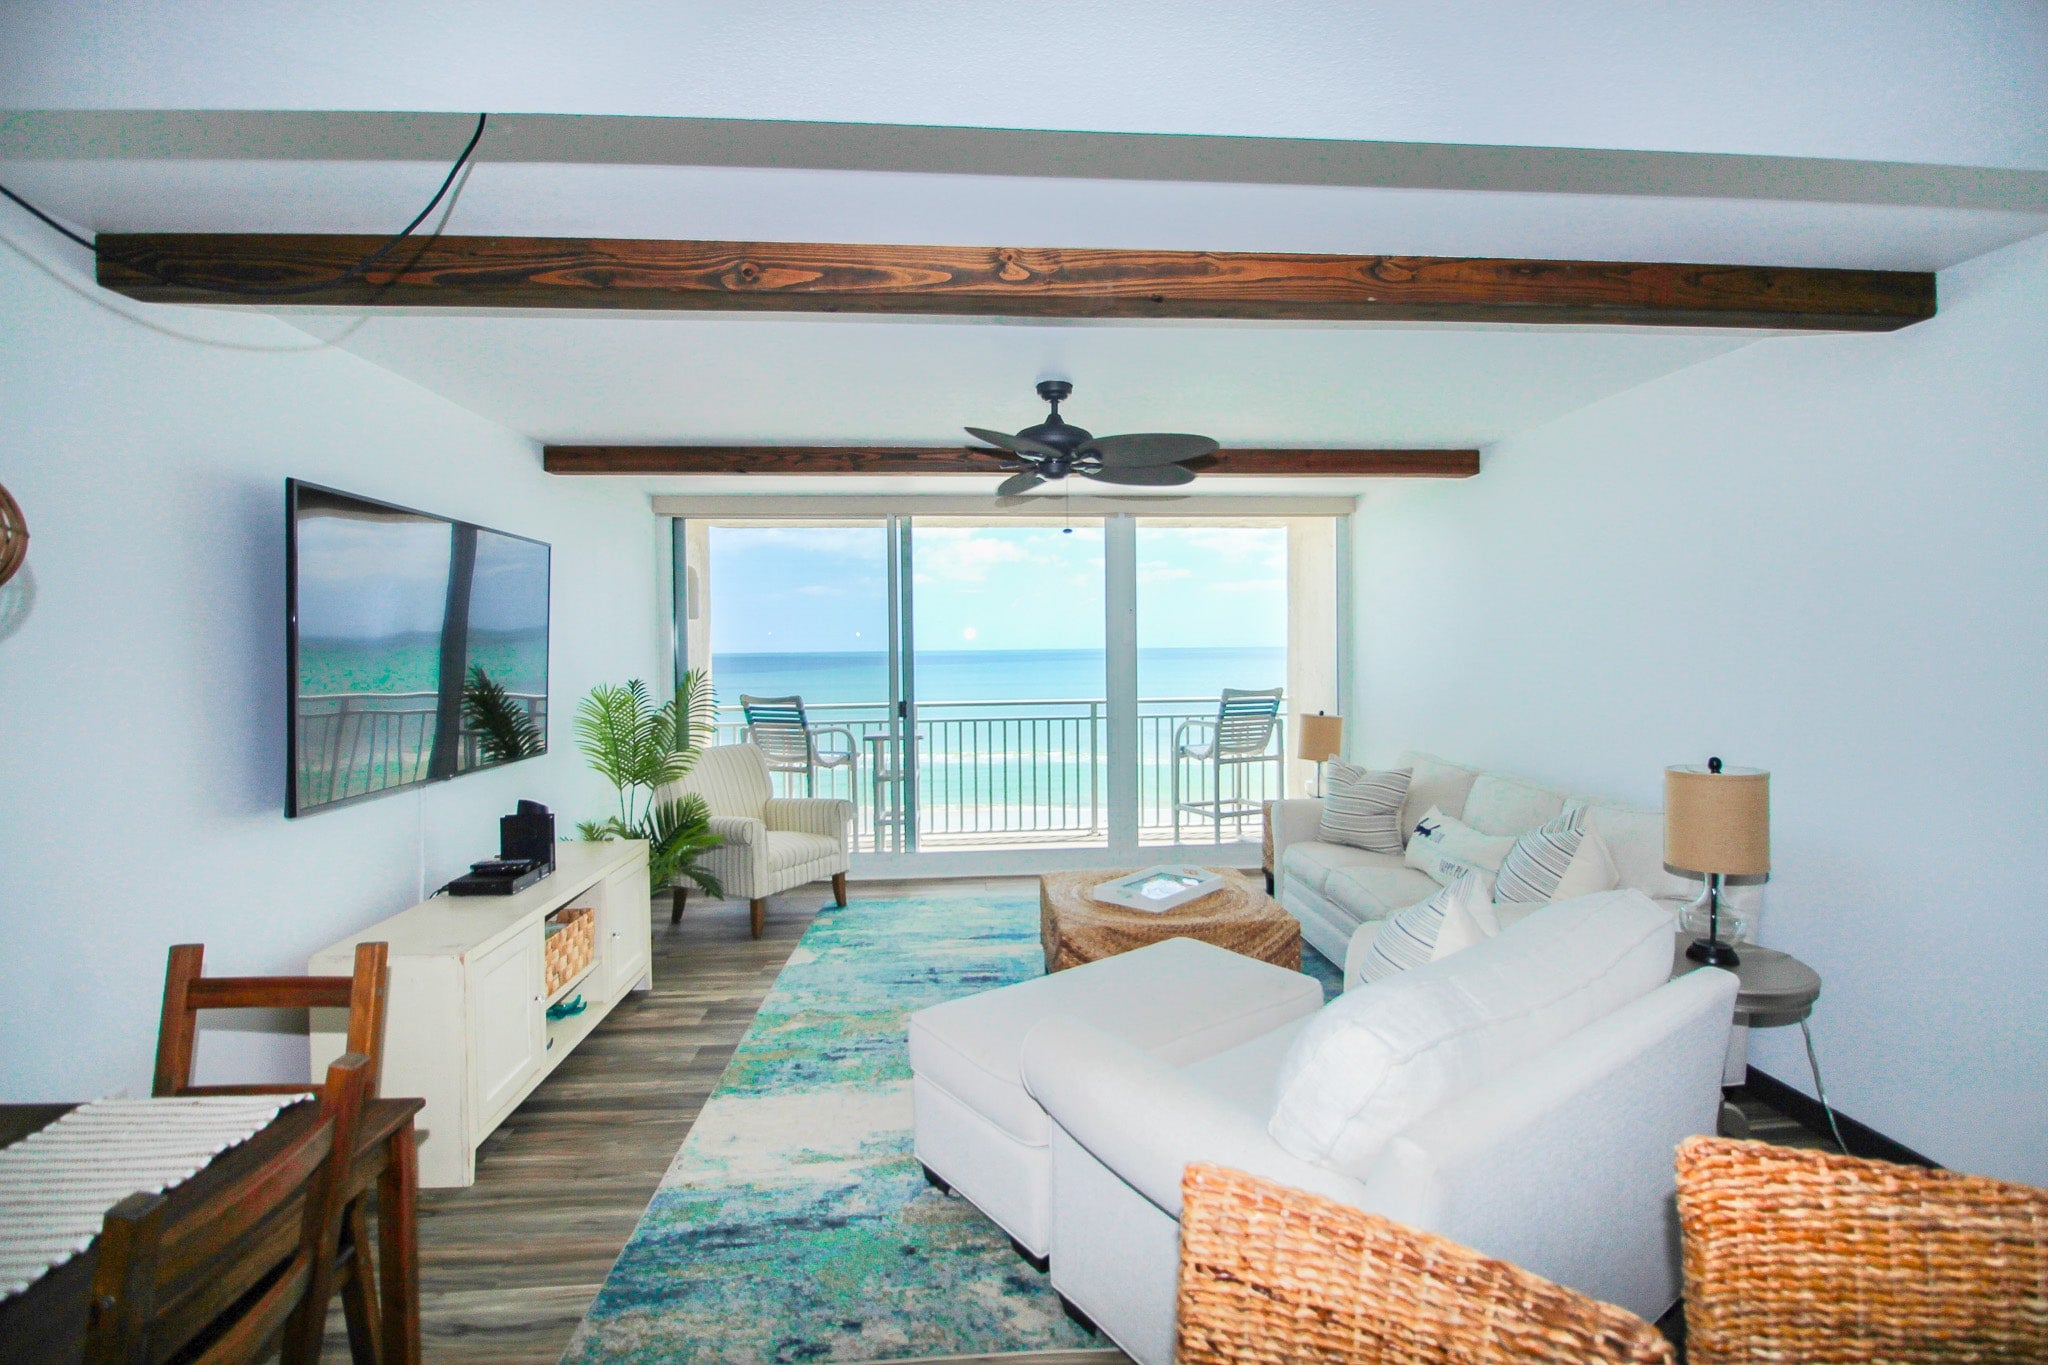 Tastefully decorated living room with stunning oceanfront view